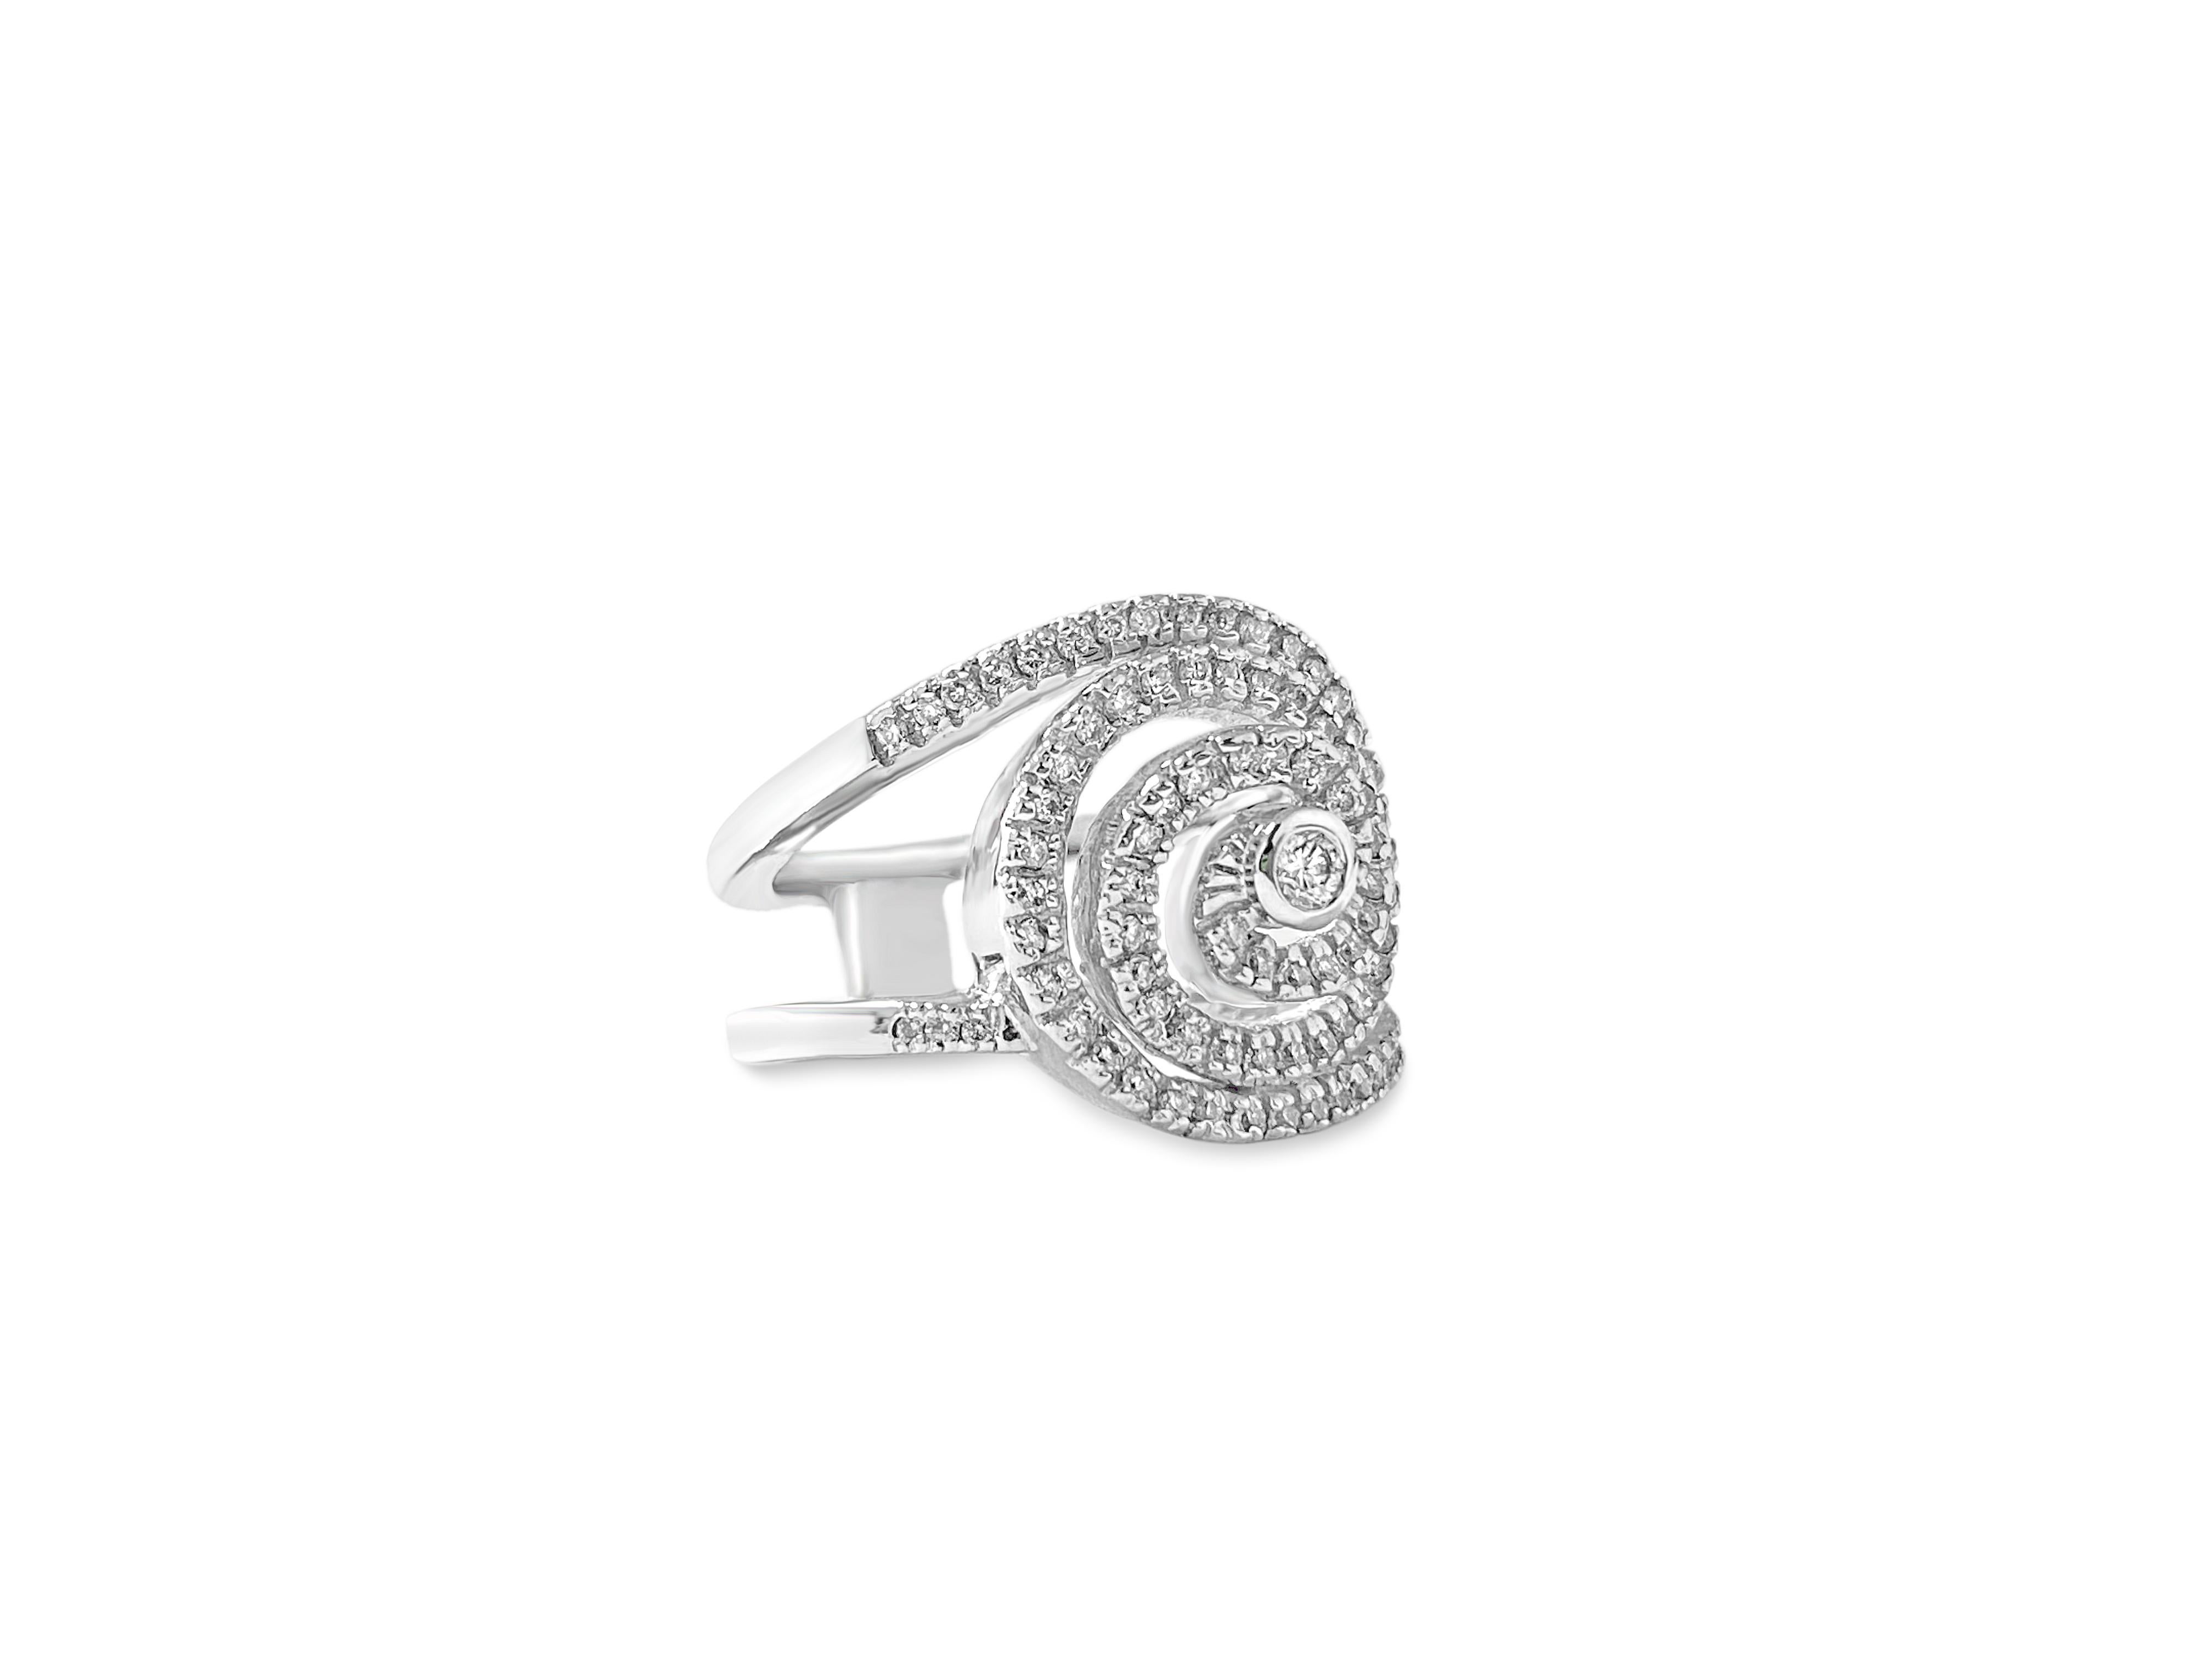 In 18k white gold, this exquisite ring features 1.00 carat total weight of round brilliant cut diamonds with G color and VS-SI clarity. All diamonds are 100% natural and earth mined, creating a stunning swirl motif design that adds elegance and